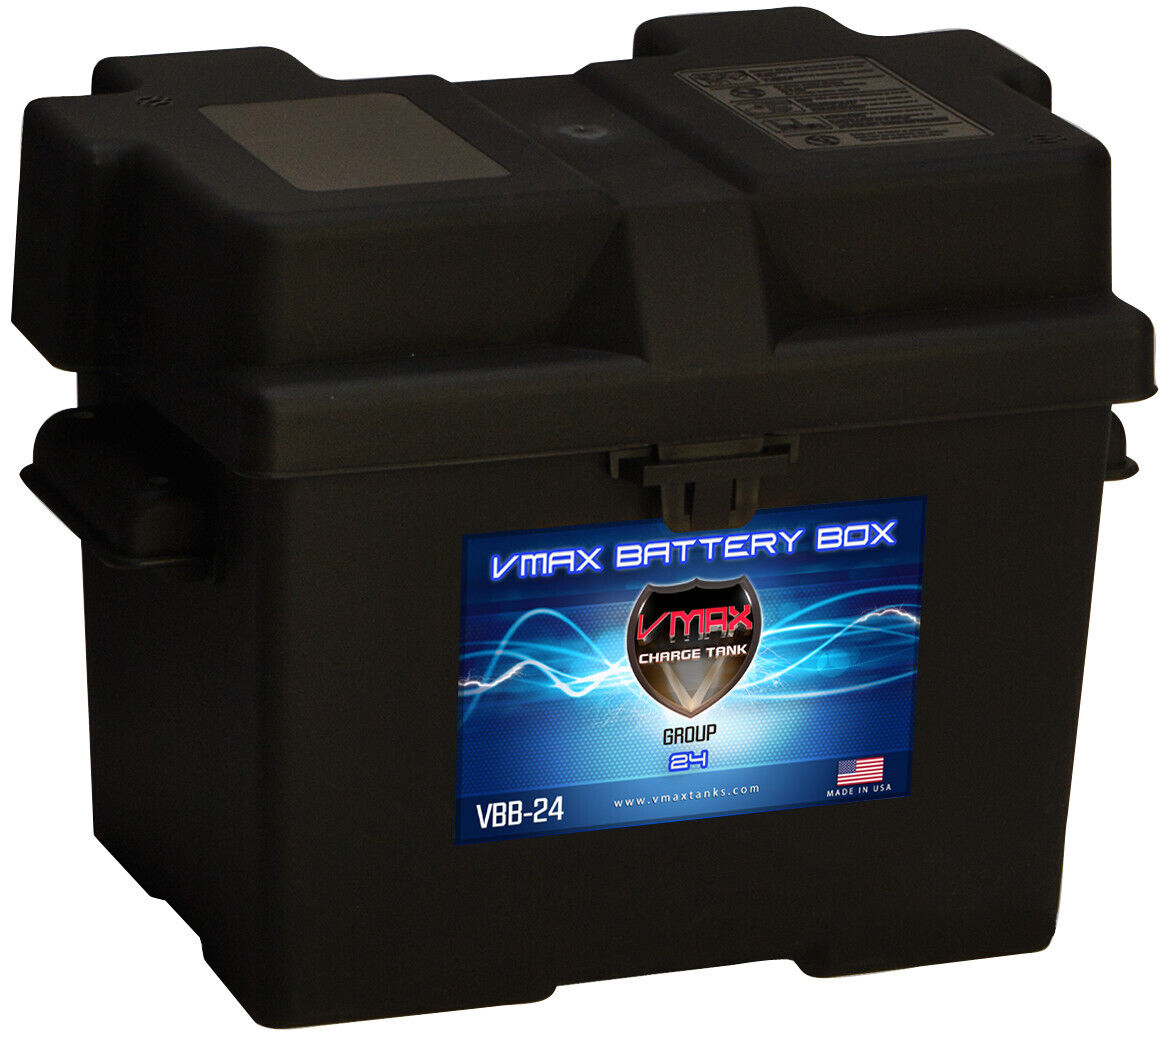 VMAX Group 24 Universal Battery Box with strap, heavy duty marine battery box